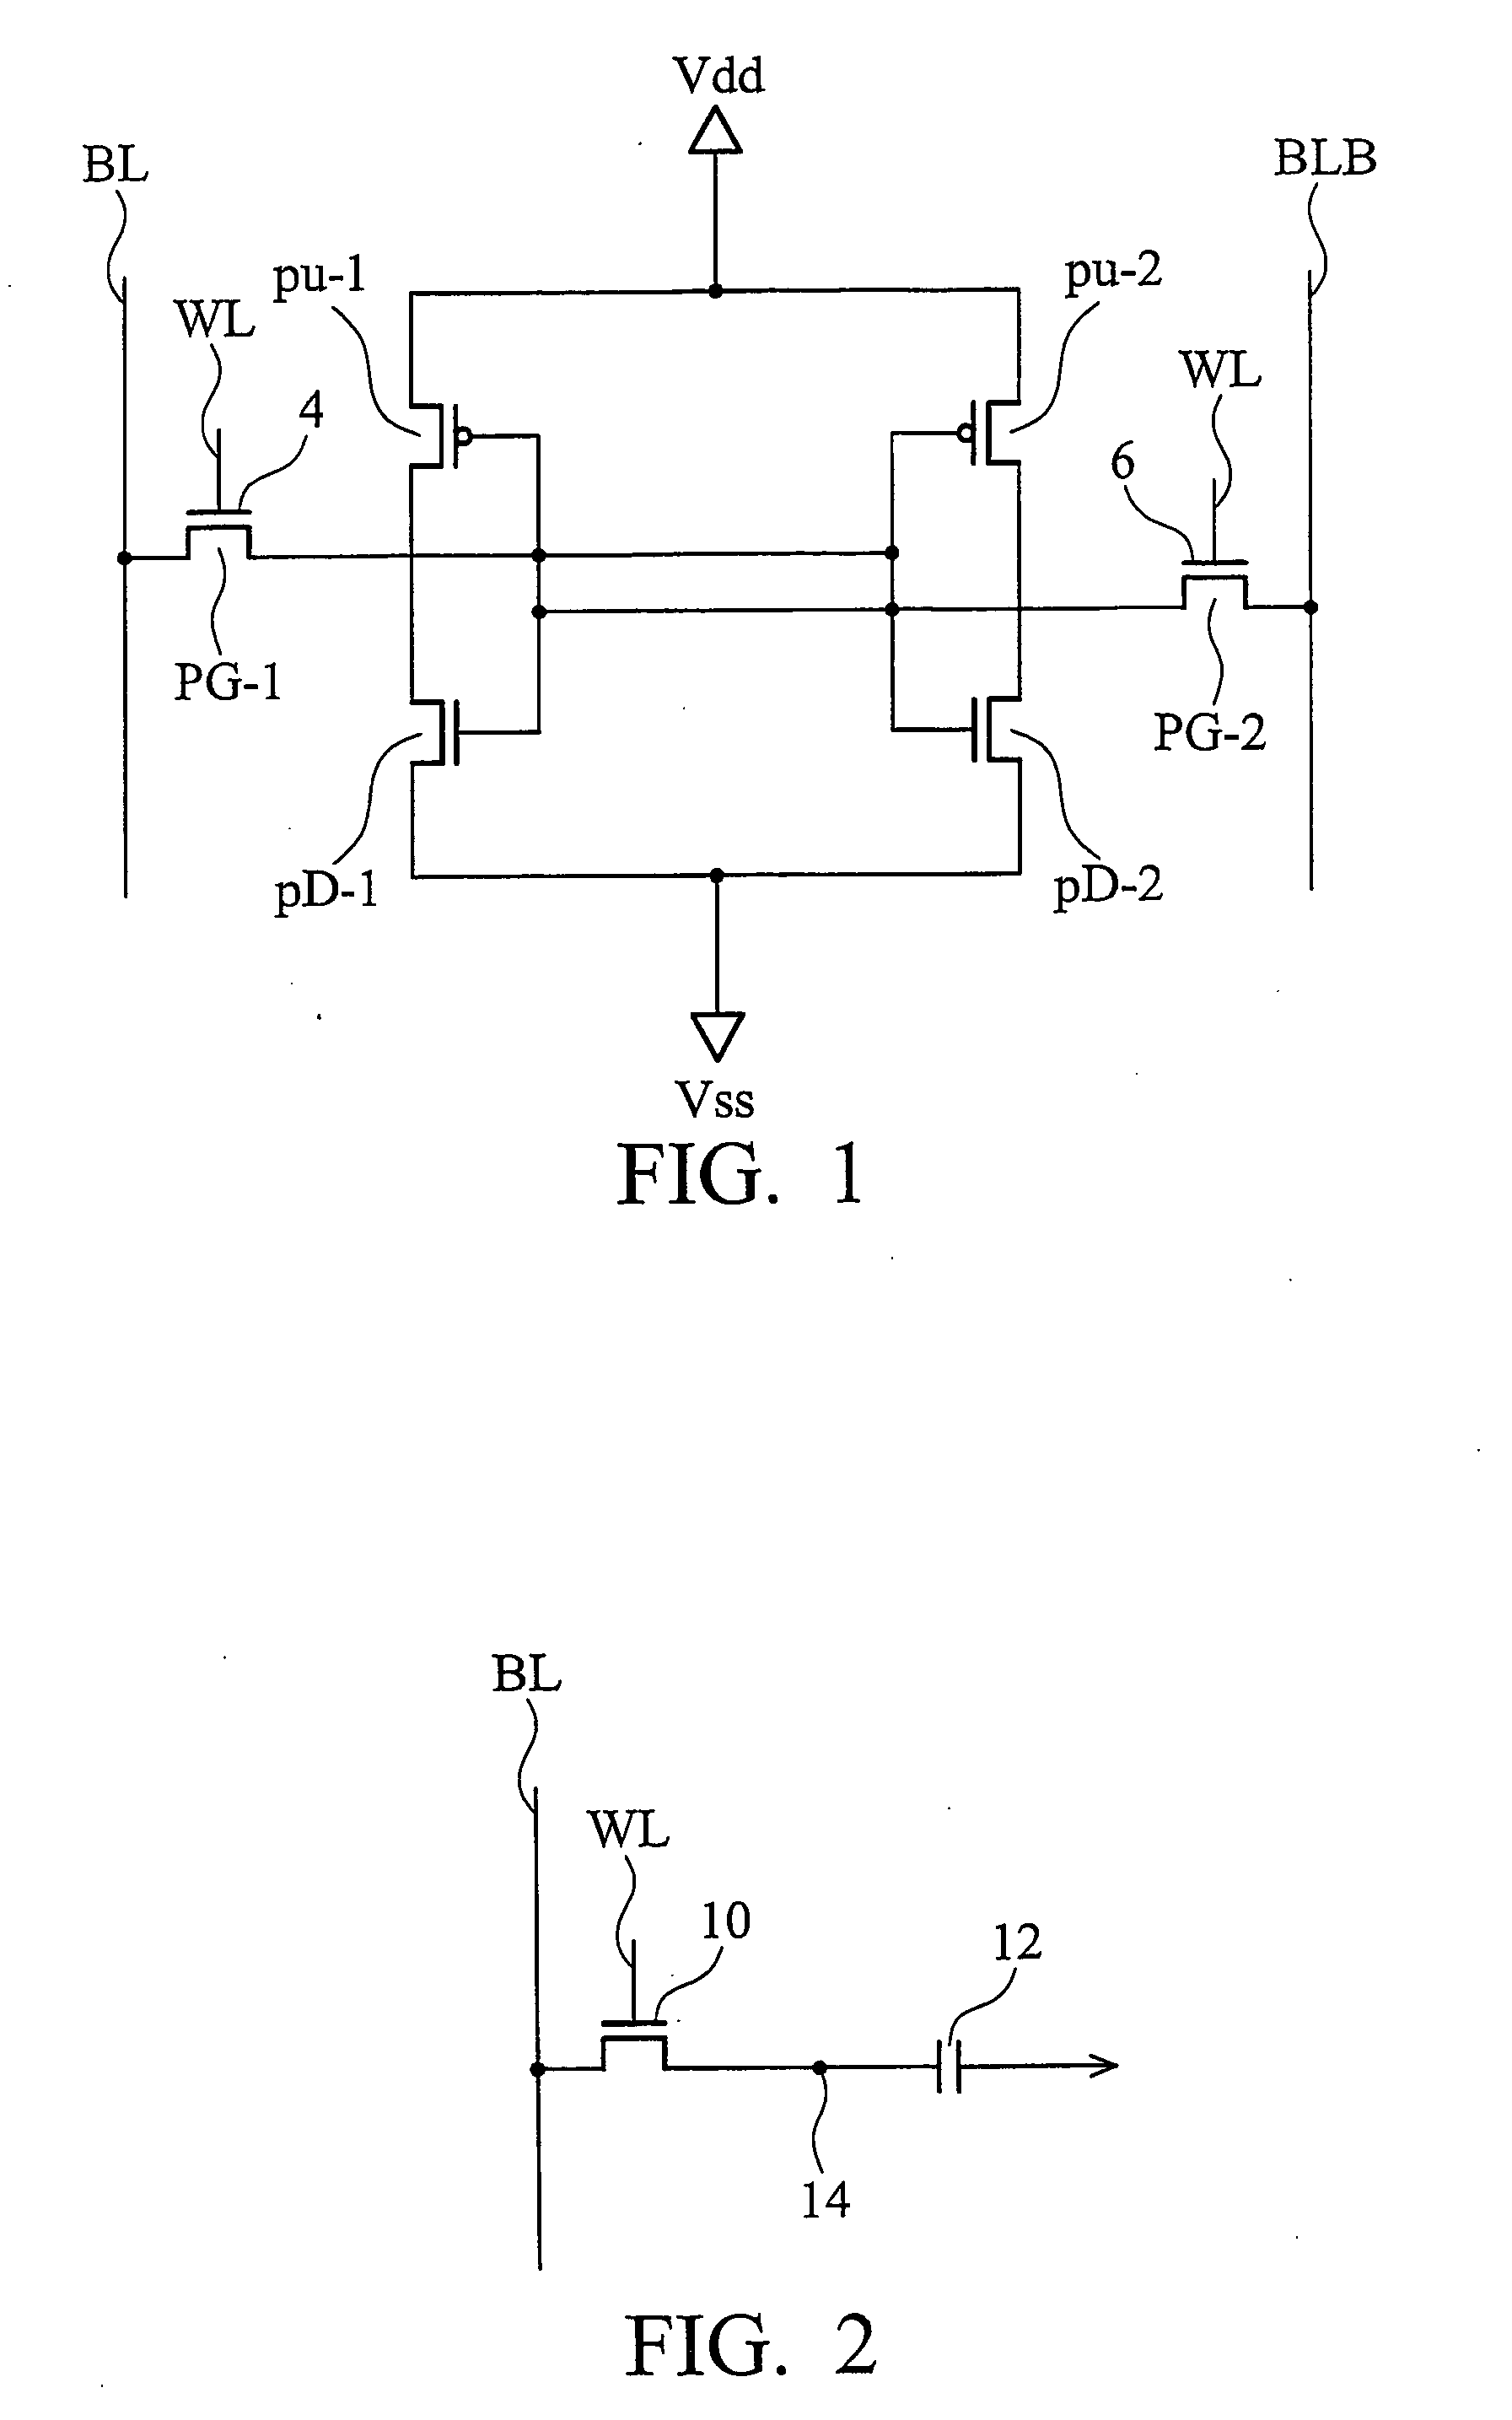 Memory formation with reduced metallization layers